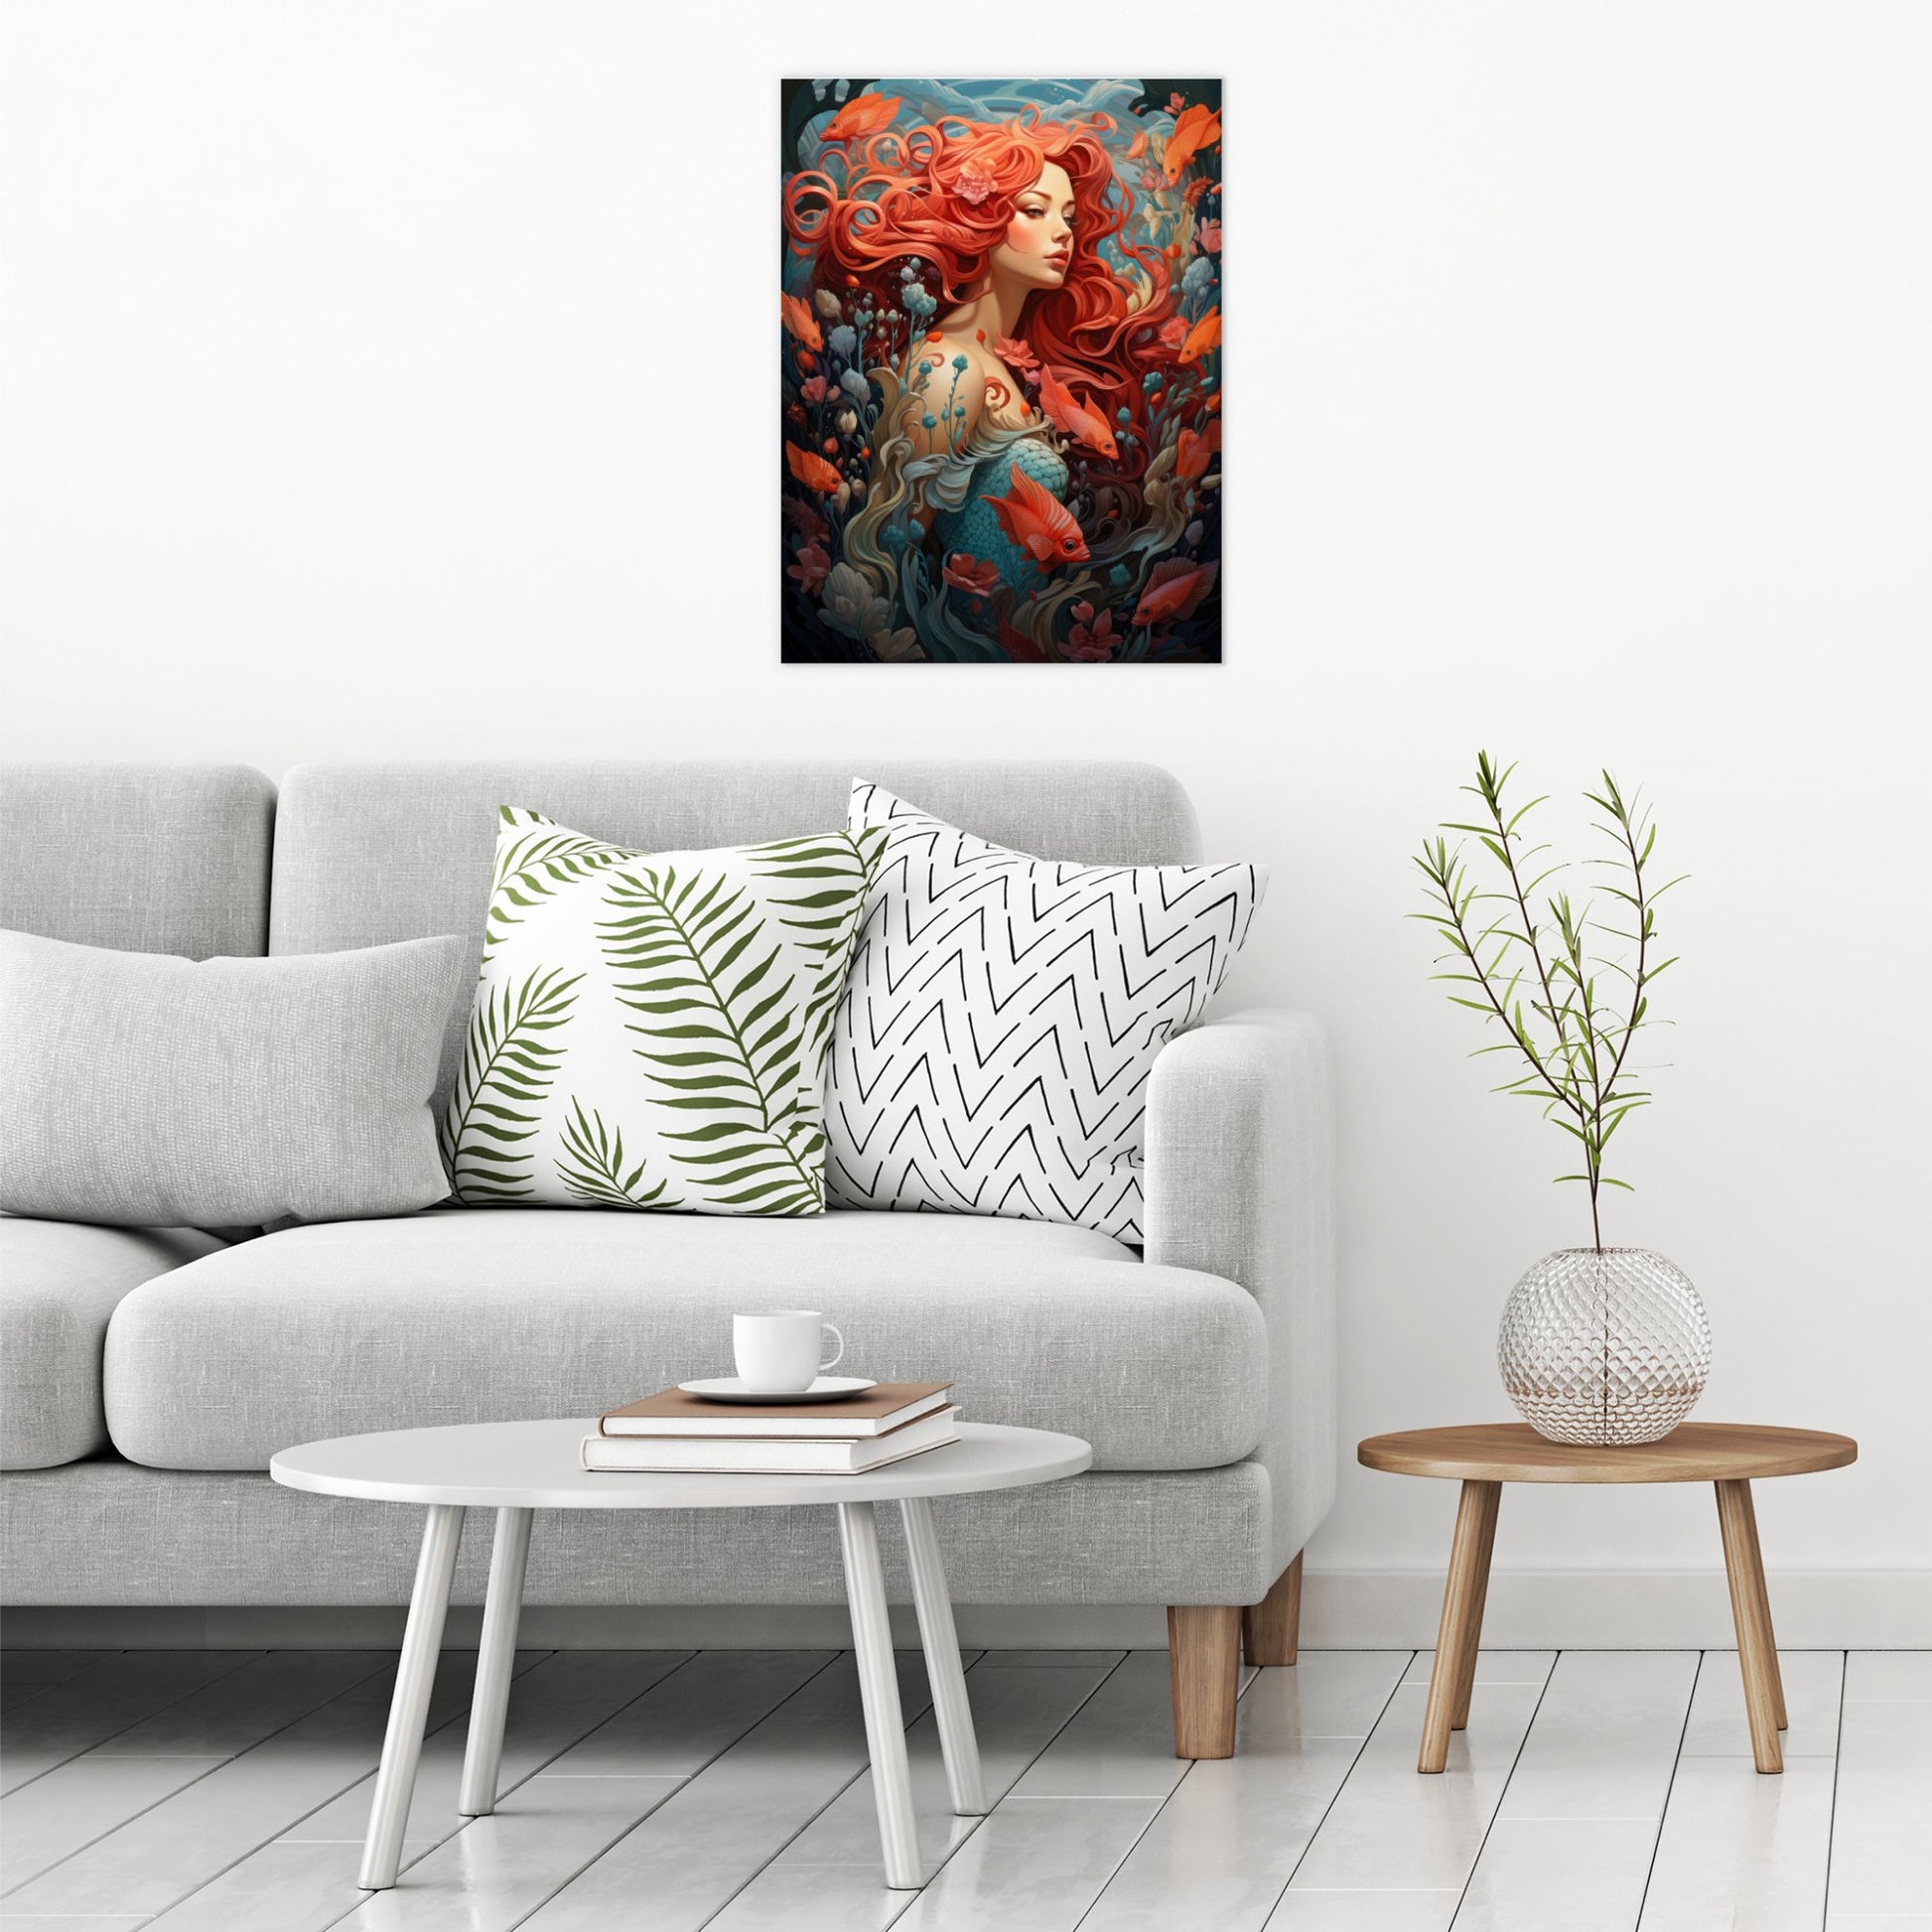 A contemporary modern room view showing a large size metal art poster display plate with printed design of a Mermaid Fantasy Painting